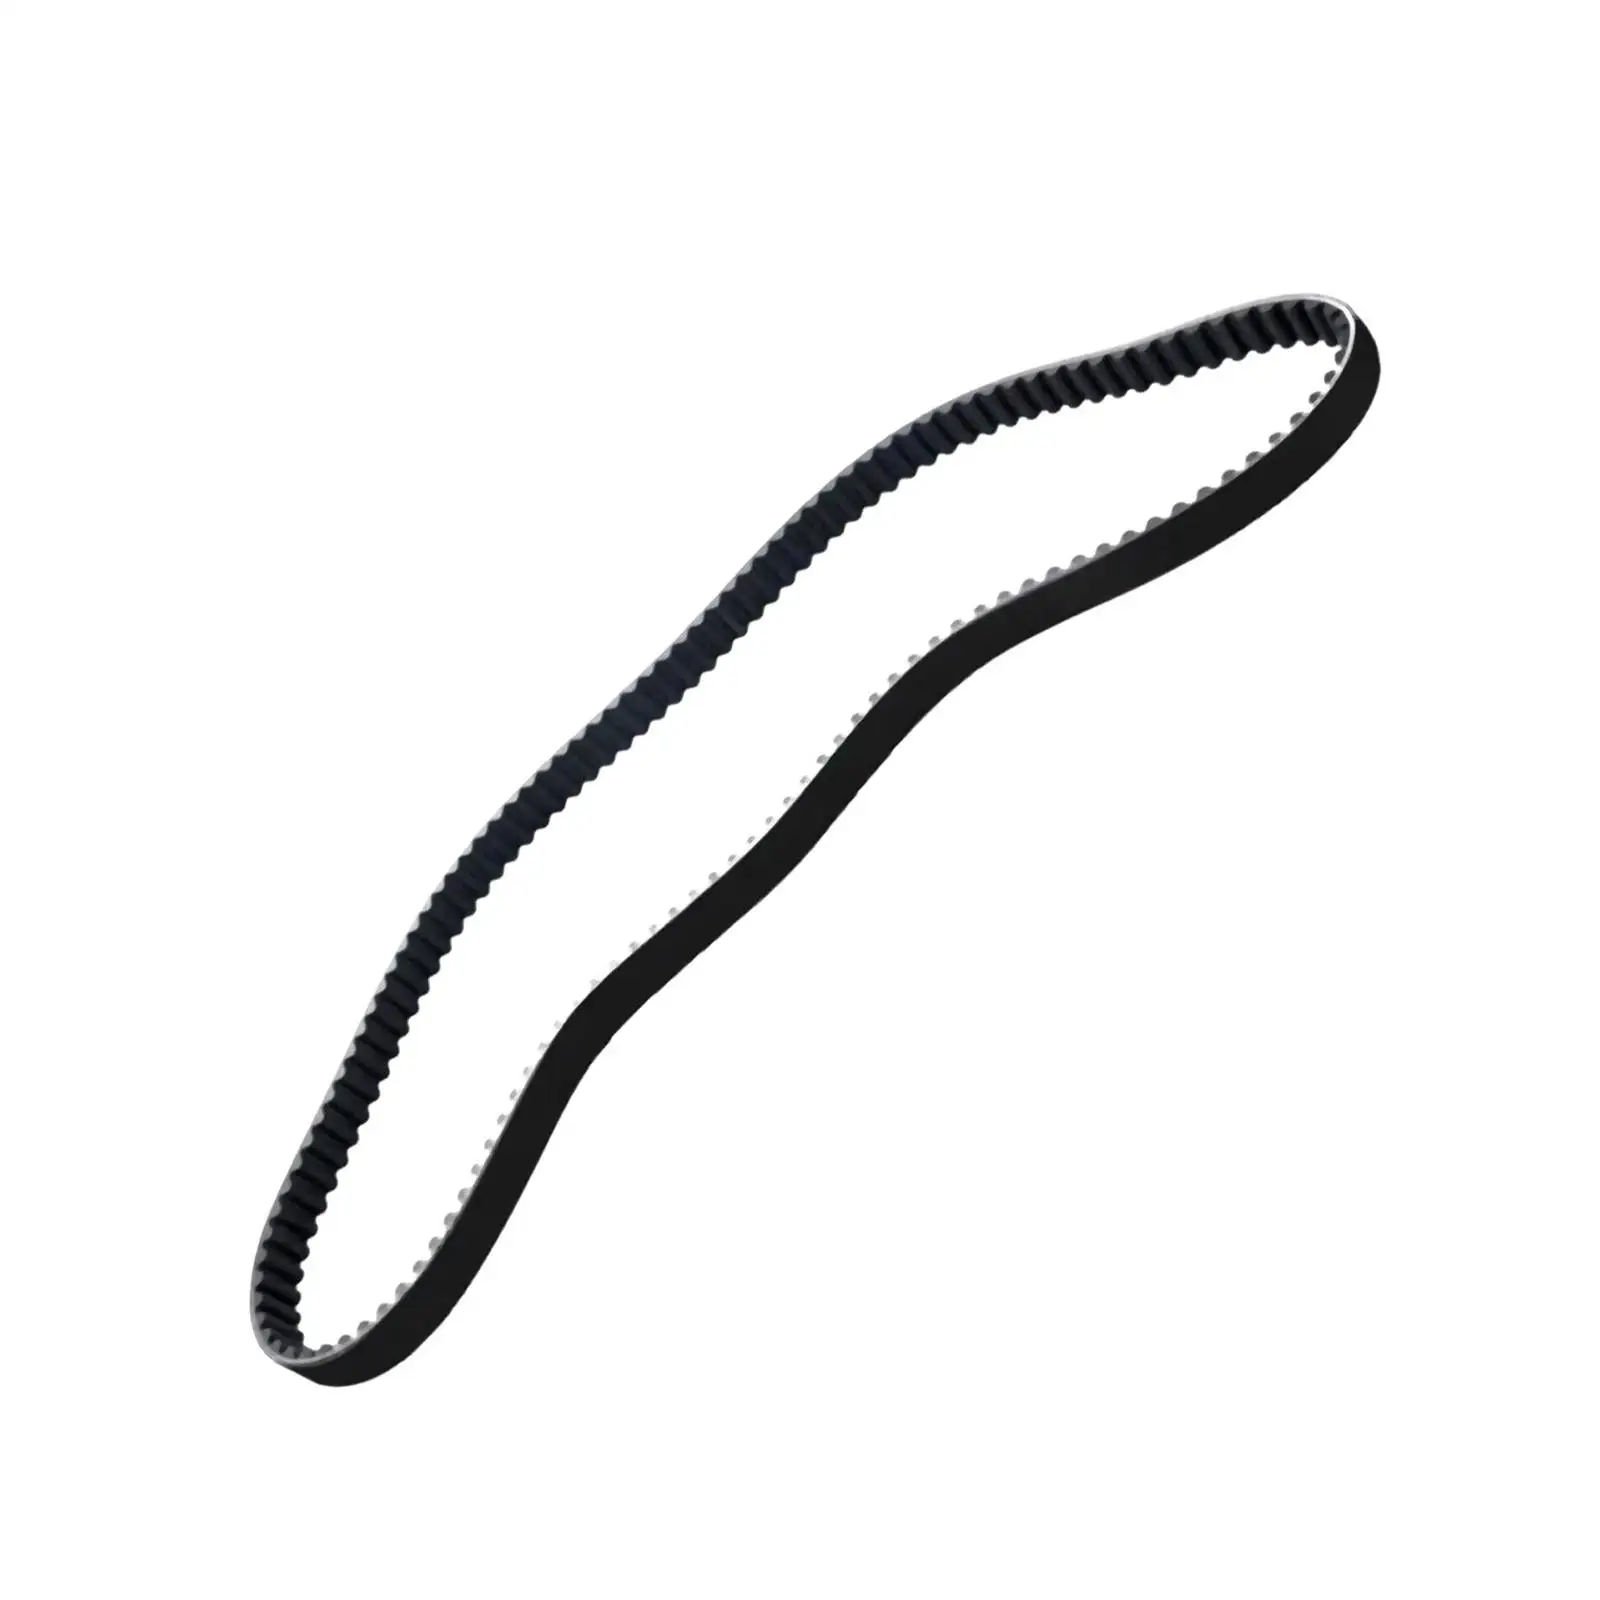 Rear Drive Belt 40001-85 Replacement Parts for Harley-davidson